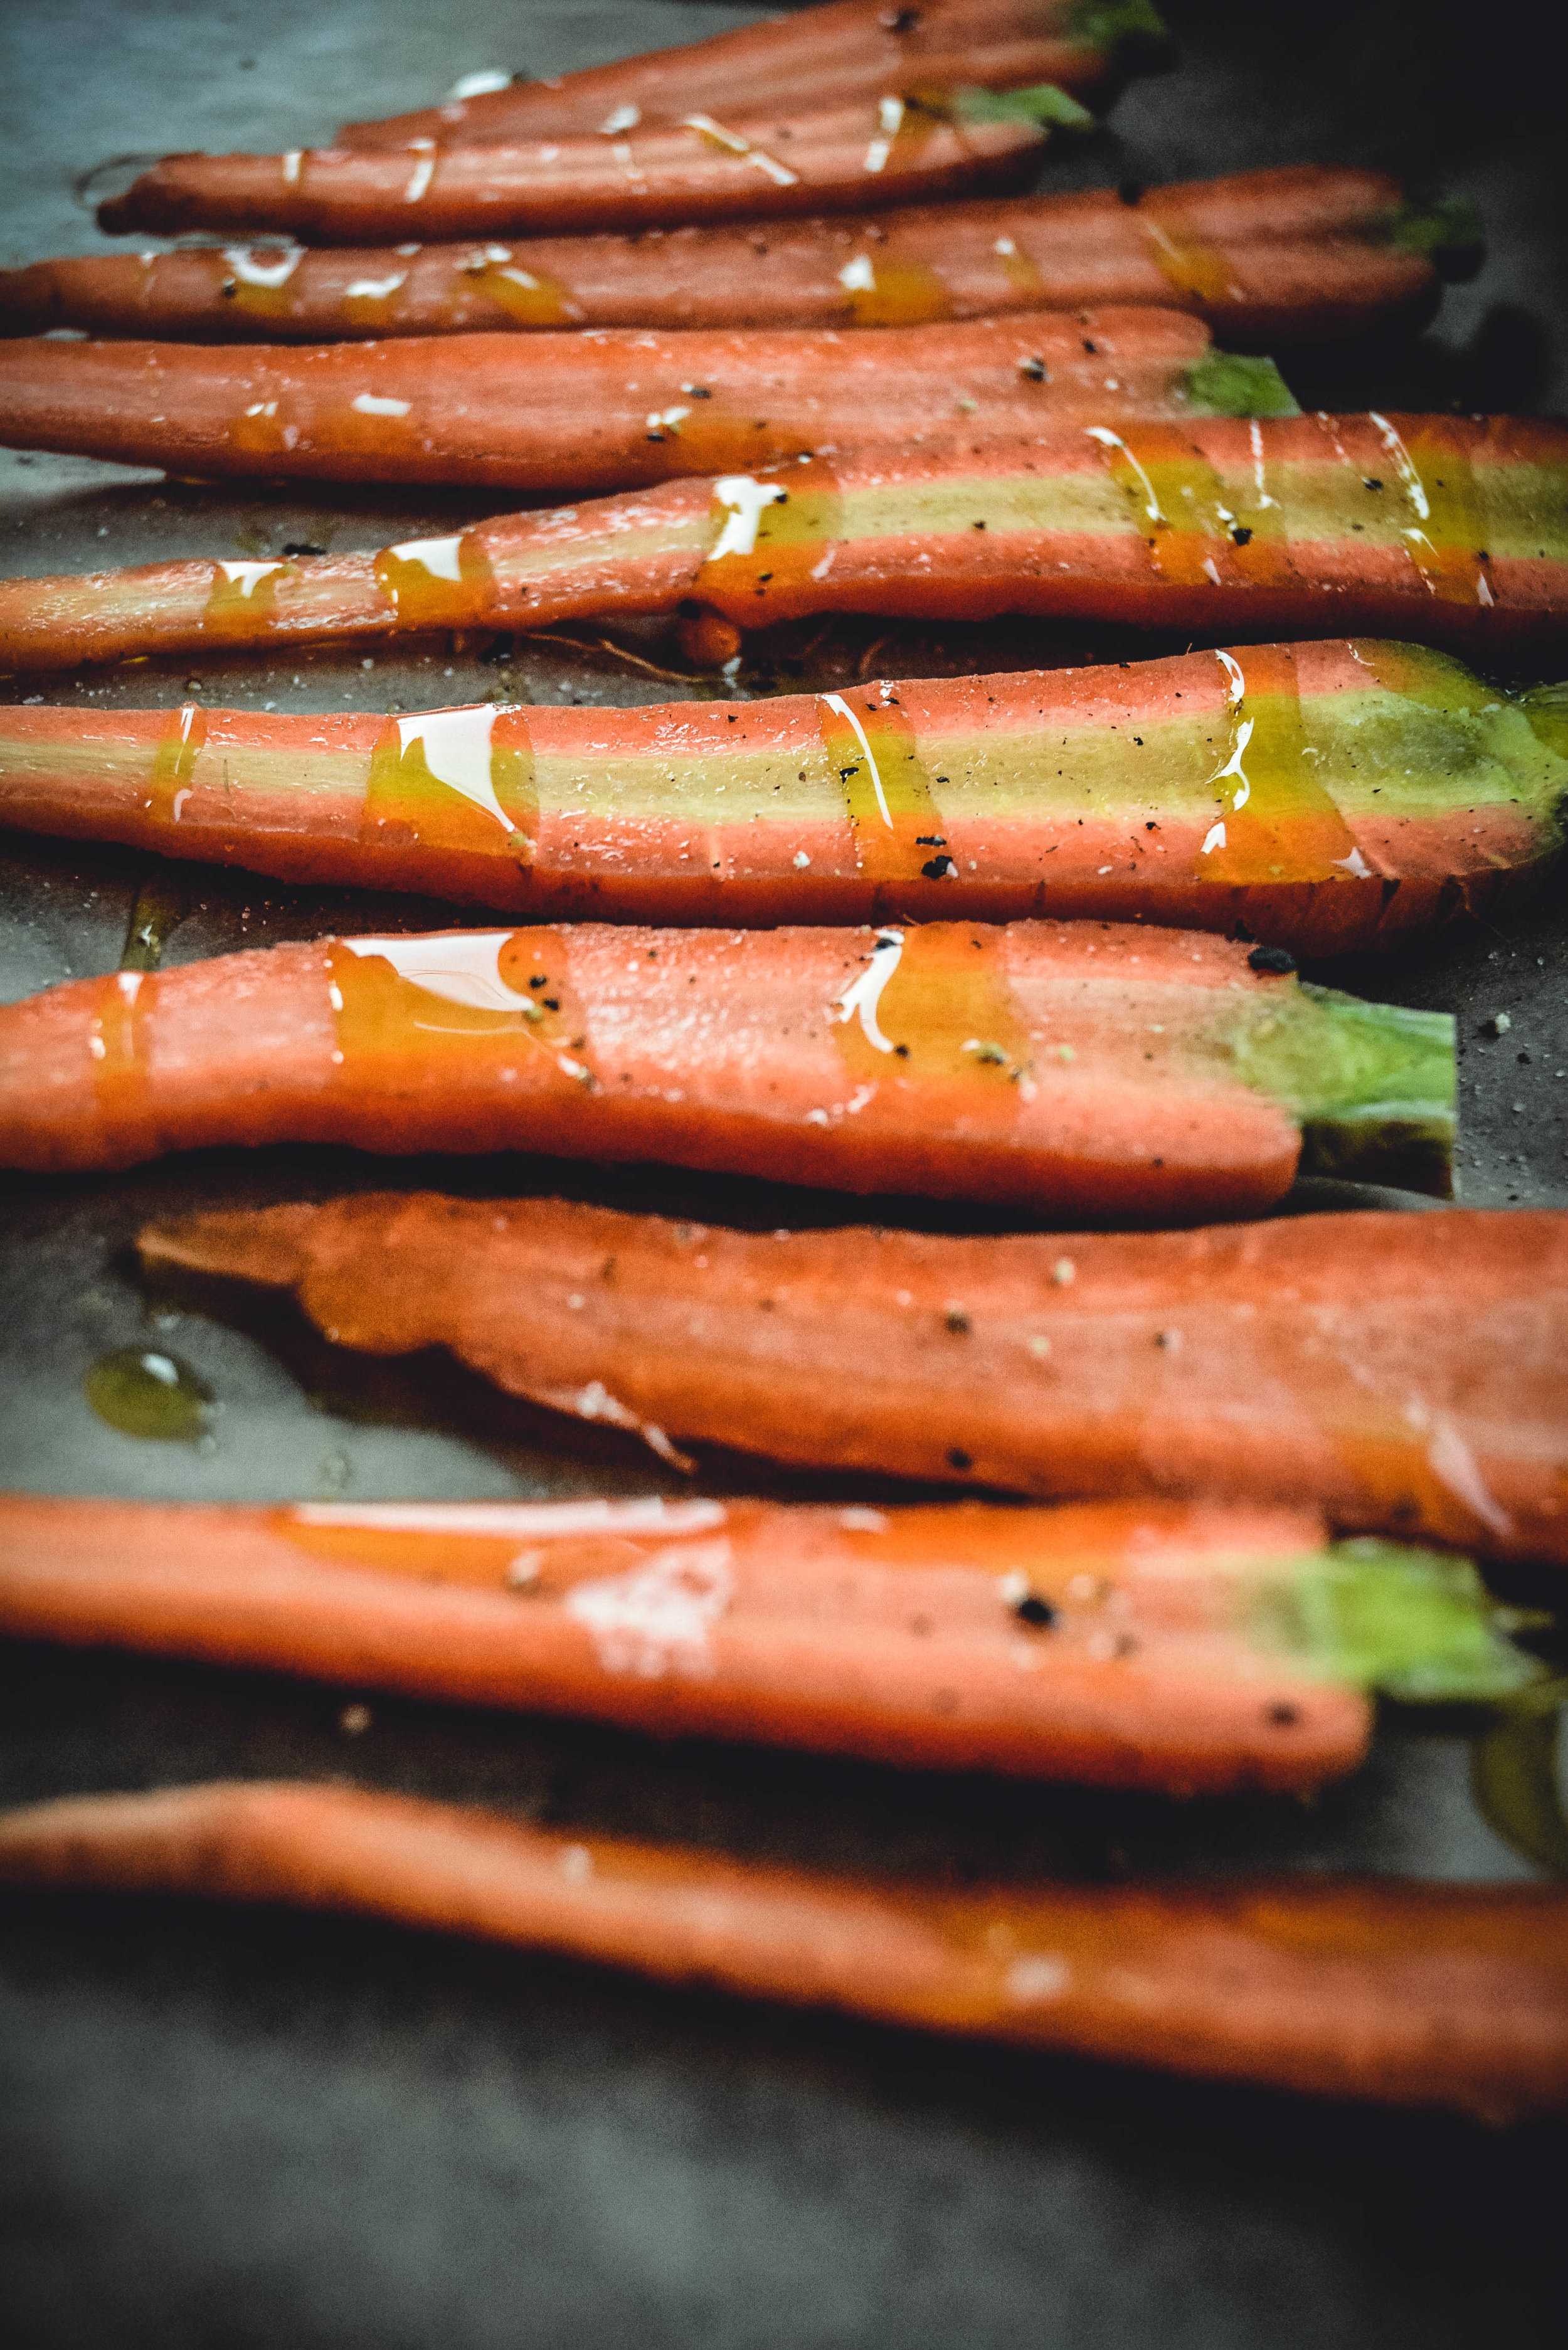 carrots sliced on tray drizzled with olive oil